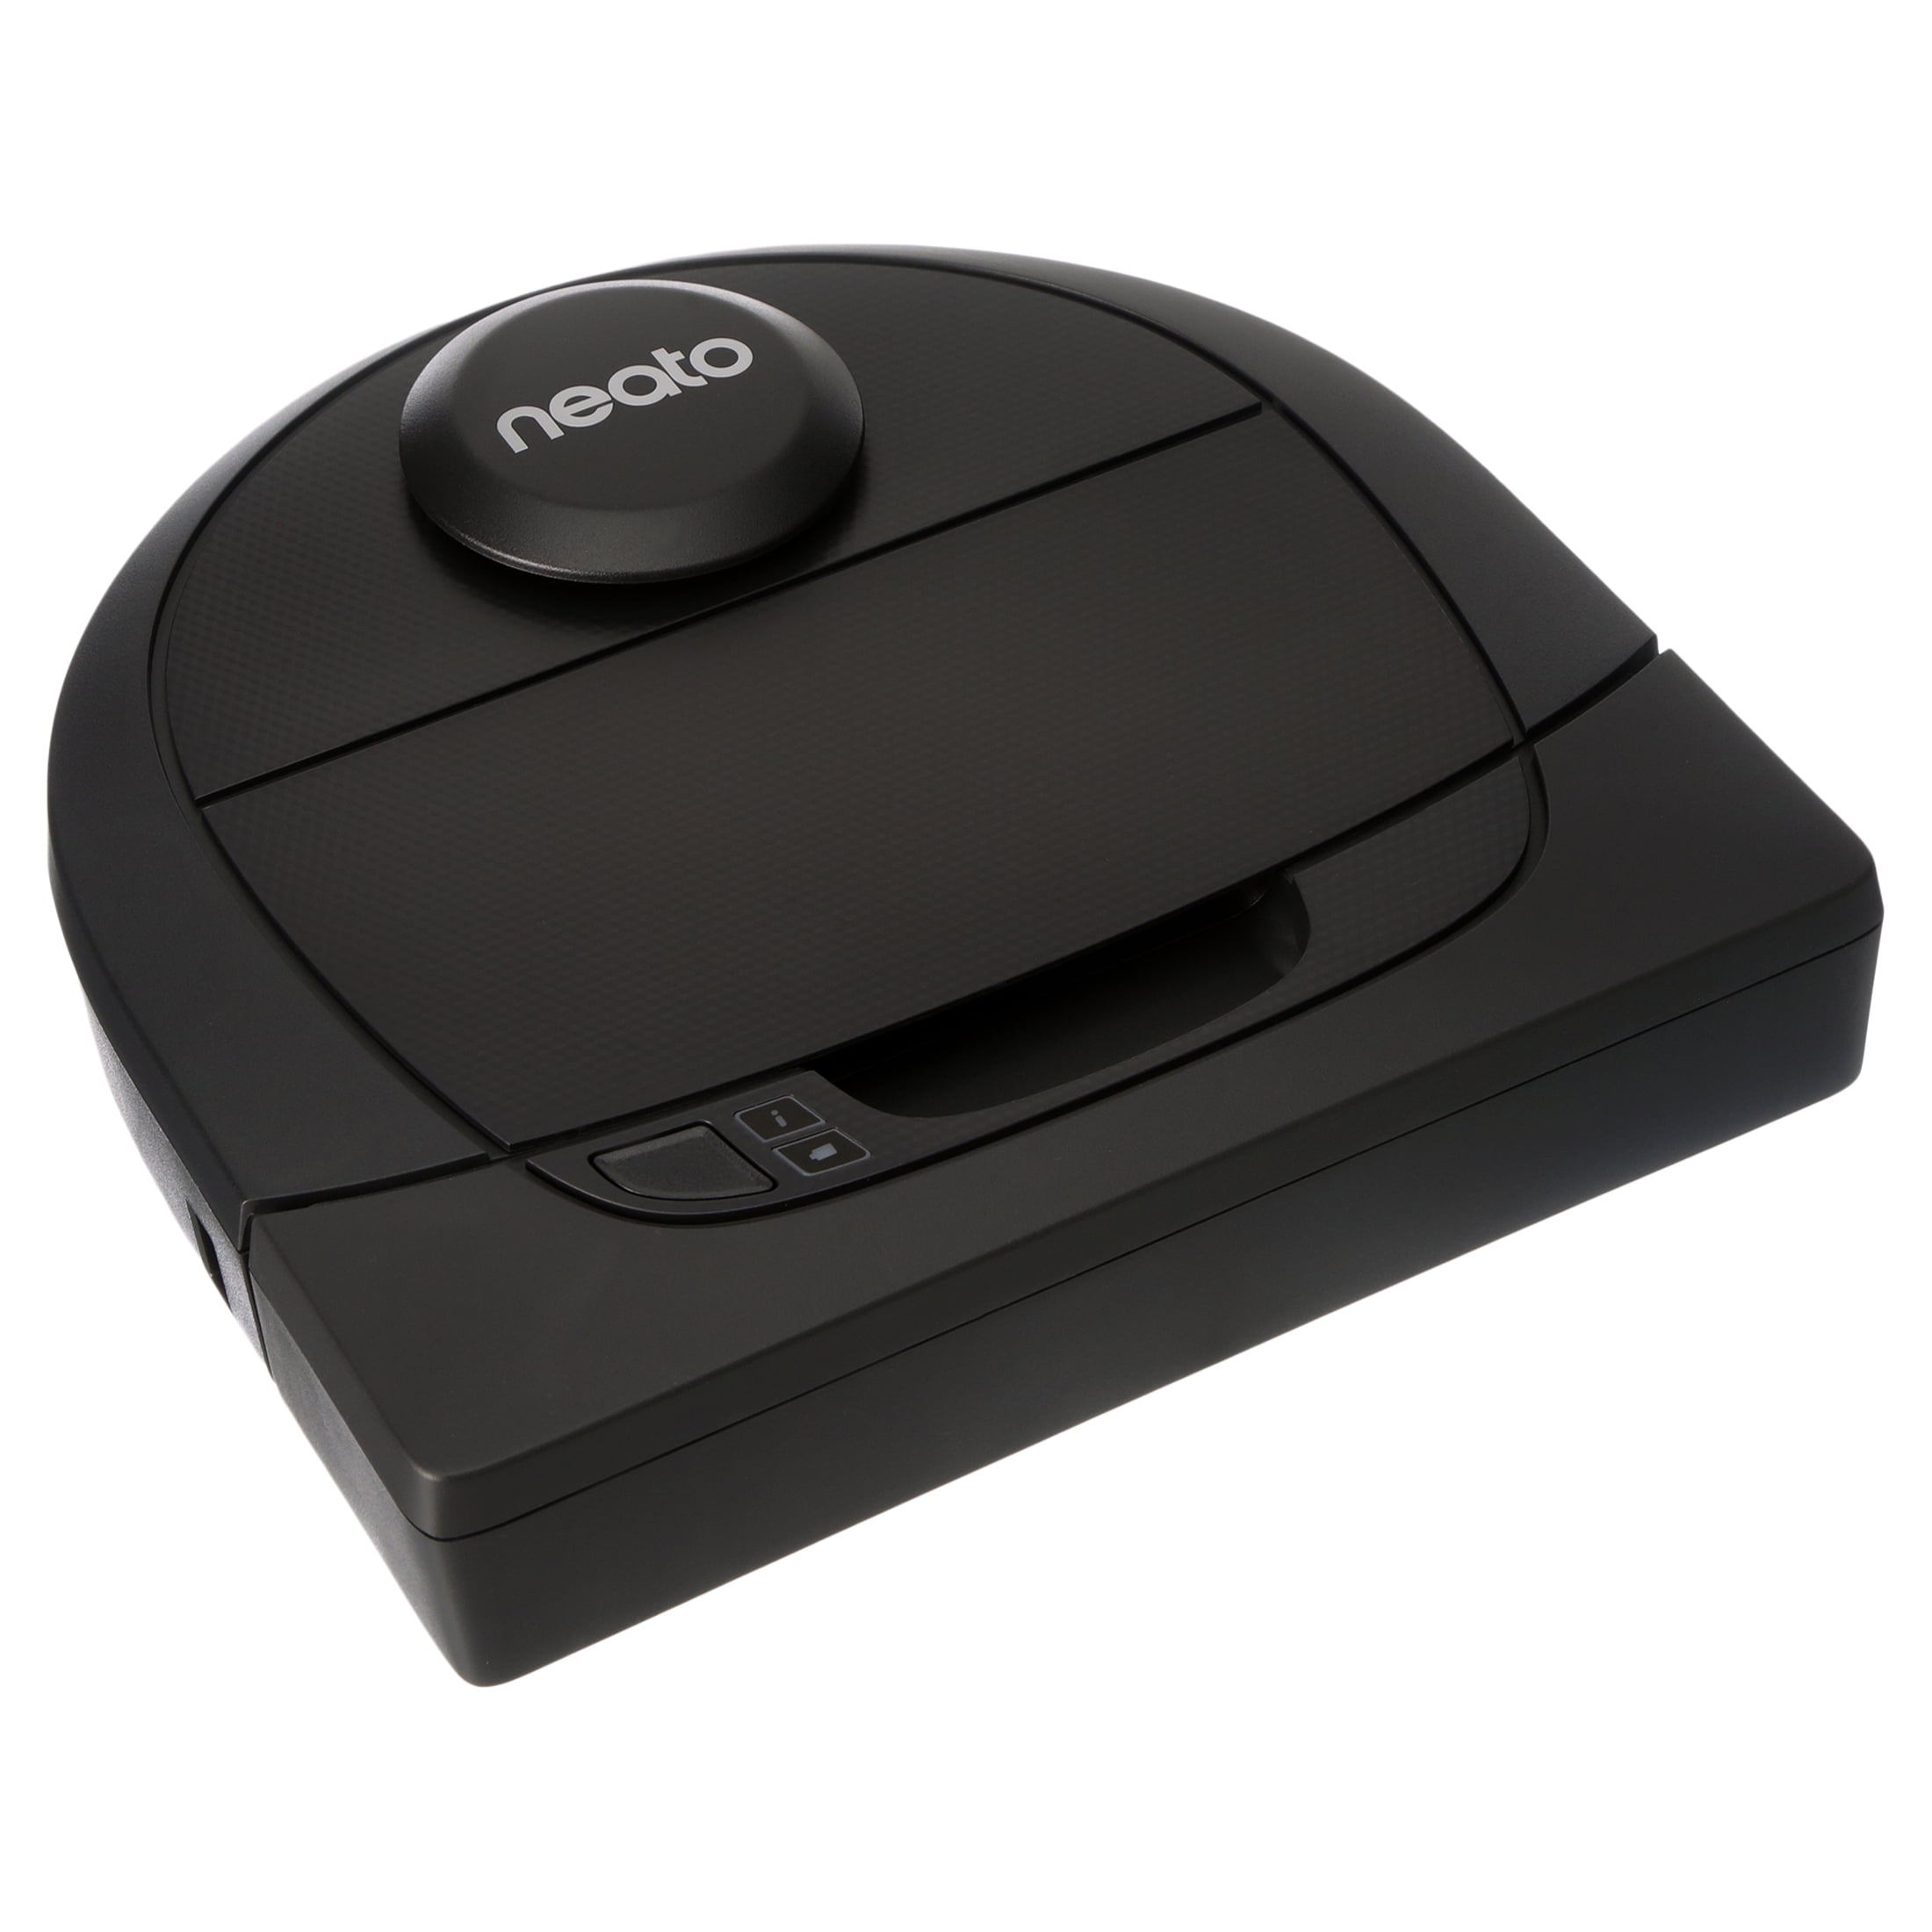 Neato 9450307 Botvac Connected D4 Robotic Vacuum Cleaner for sale online 